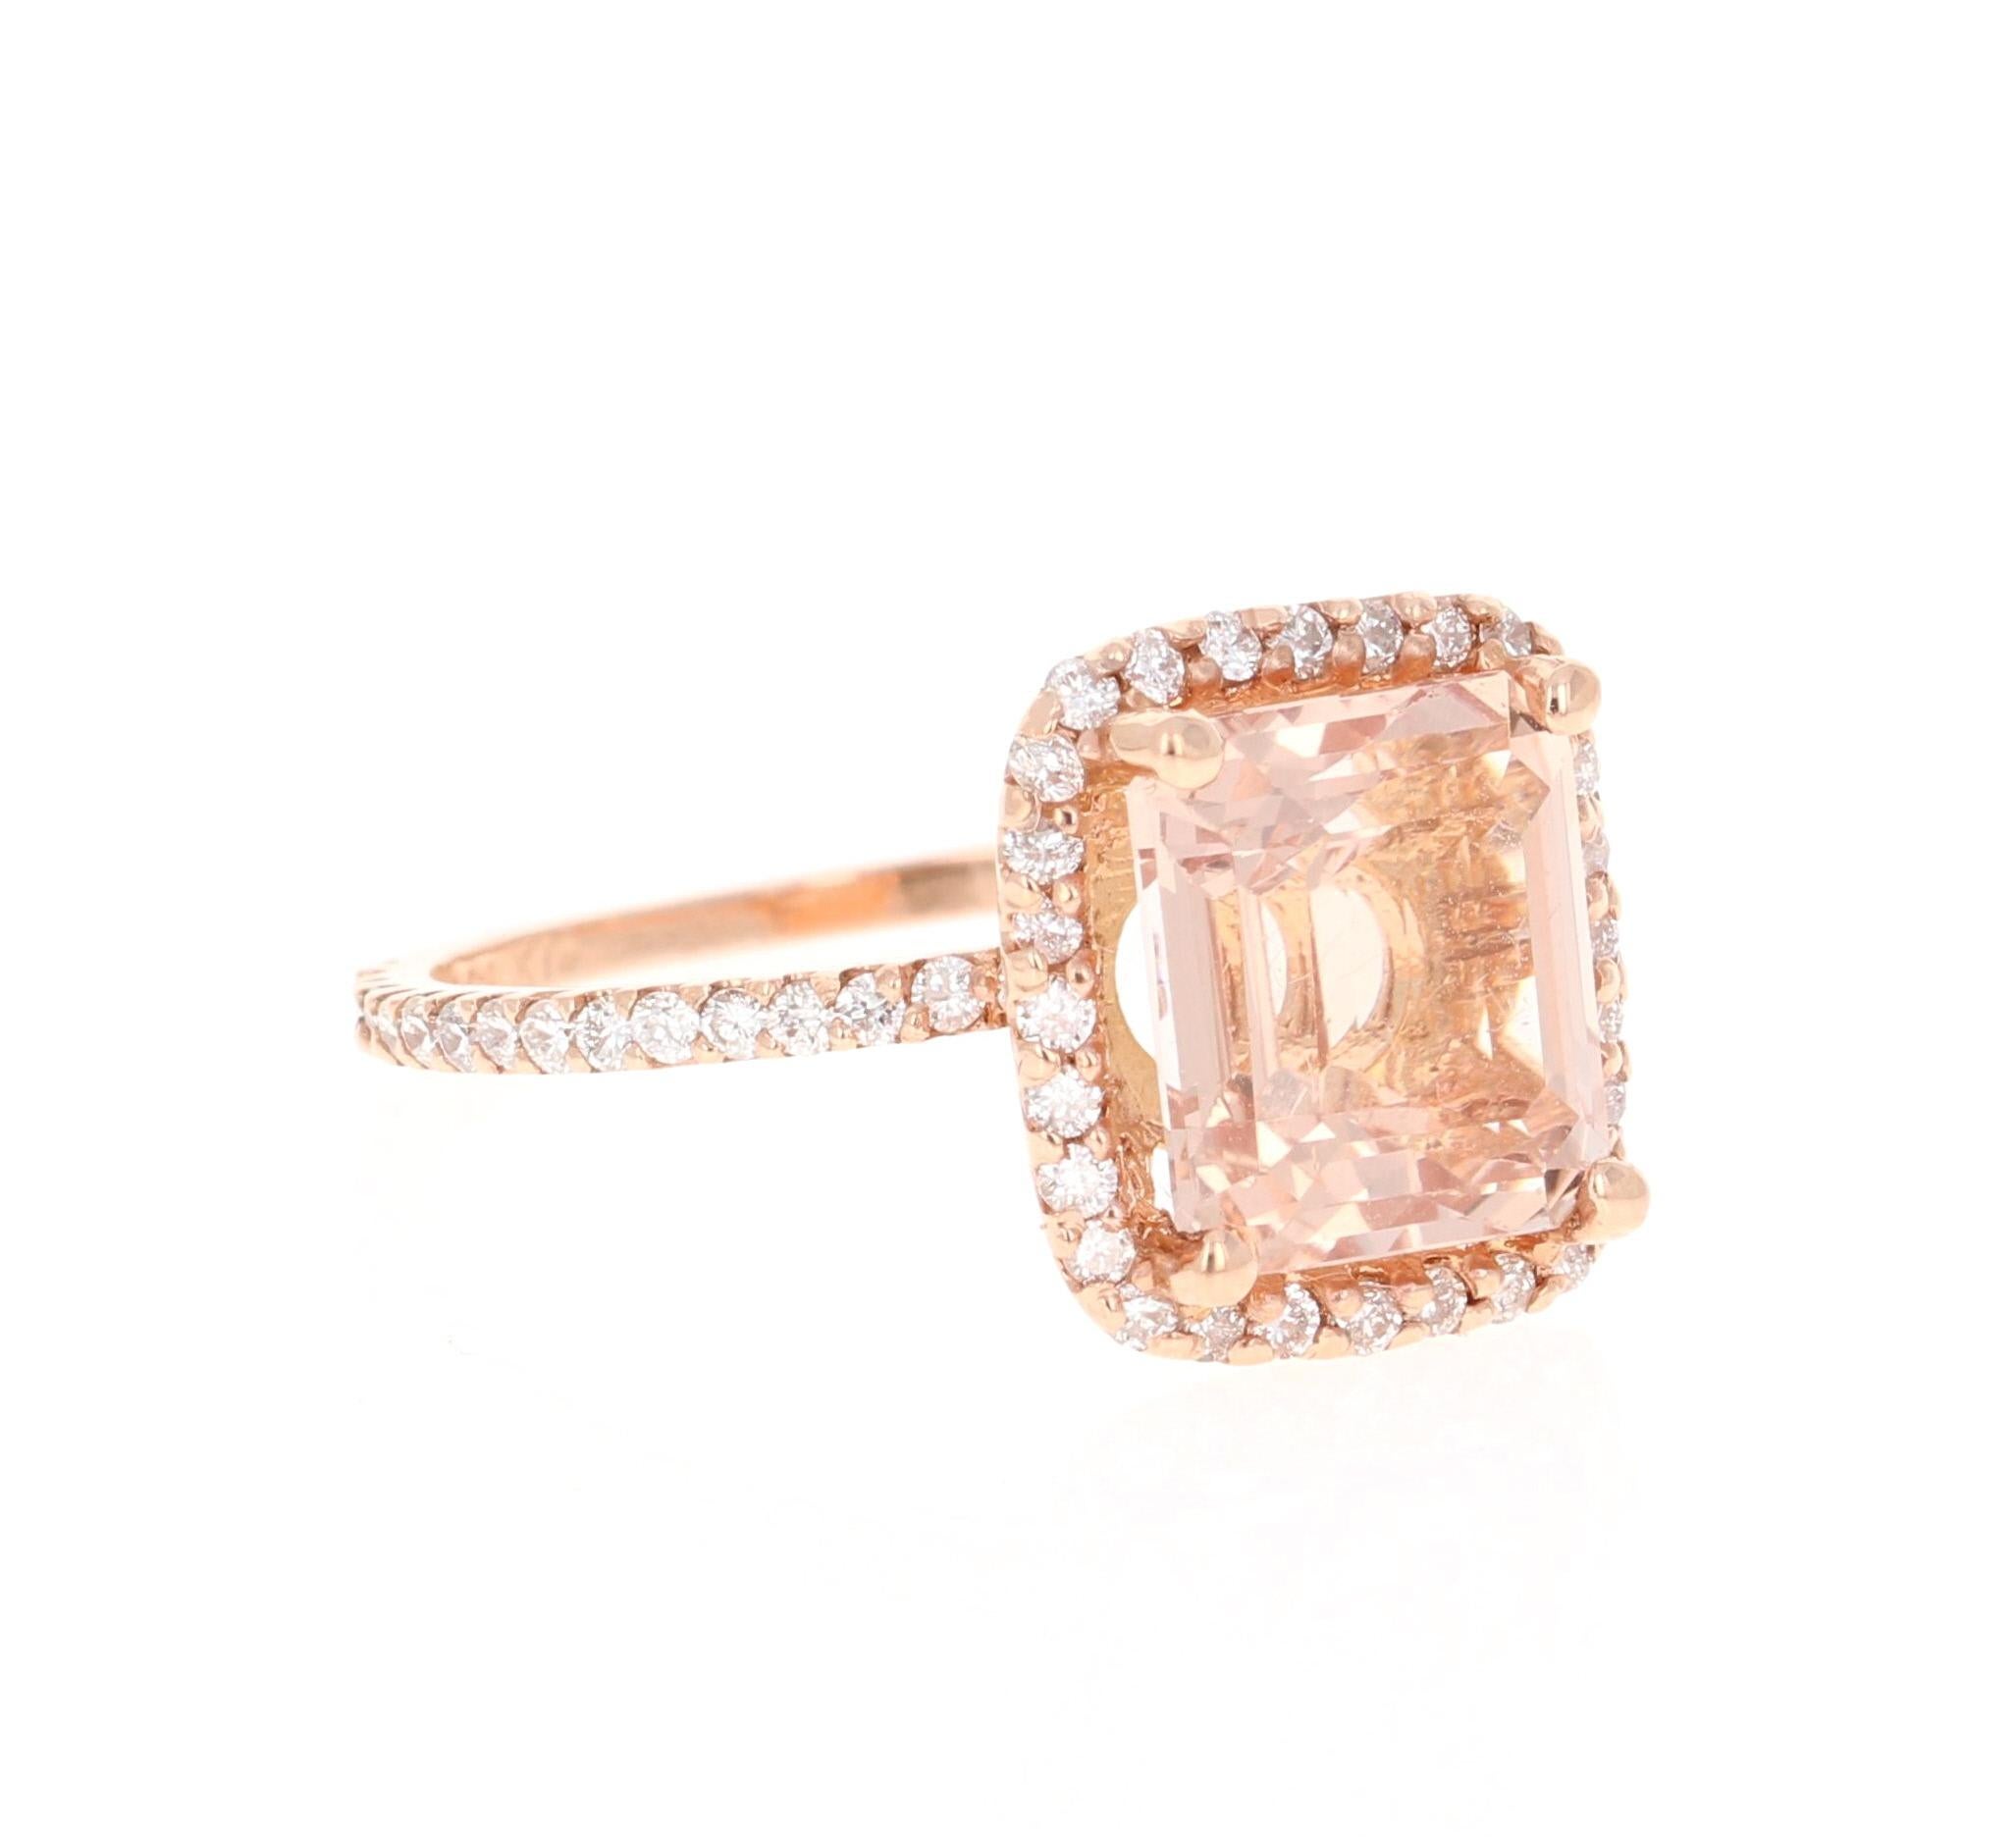 Statement Morganite Diamond Ring! 

This Morganite ring has a 3.84 Carat Square-Emerald Cut Morganite and is surrounded by 80 Round Cut Diamonds that weigh 0.67 Carats. The total carat weight of the ring is 4.51 Carats.  

The Morganite is 11 mm x